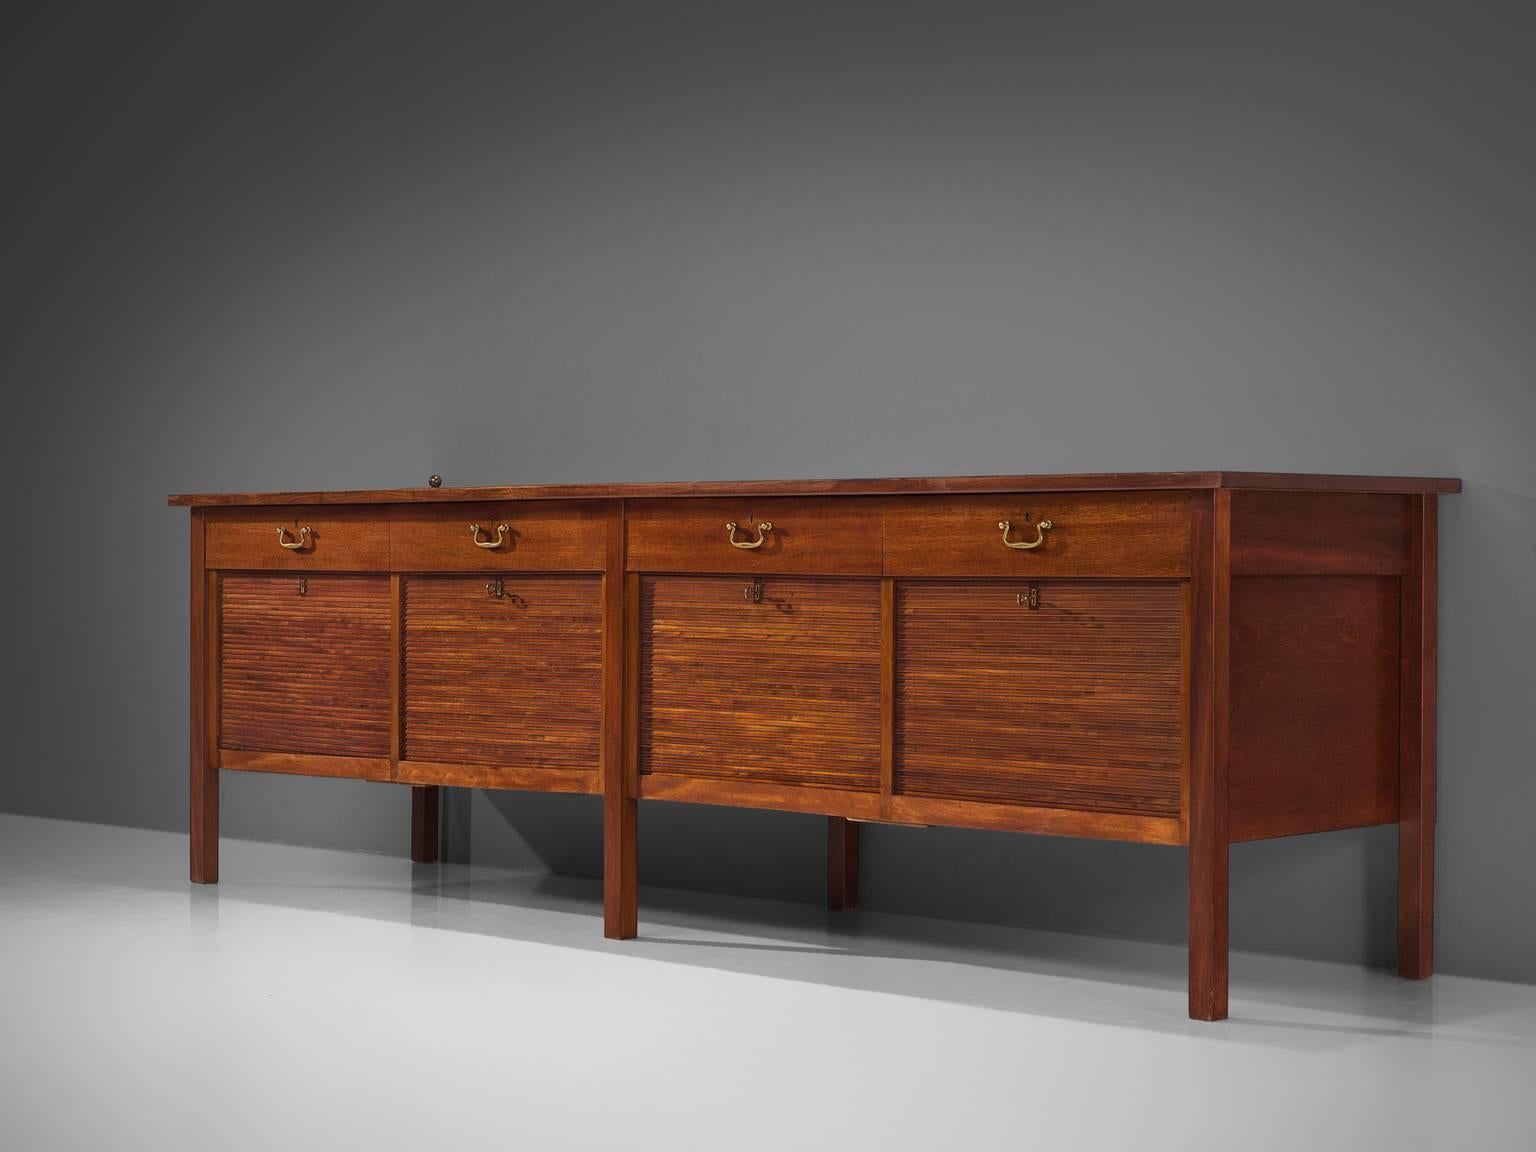 Preben Hansen for Peter Petersen, cabinet, teak and brass, Denmark, 1940s.

This Classic sideboard features a combination of Classic traits such as the tambour doors and rich materials such as the rich colored patinated brass and the dark teak.